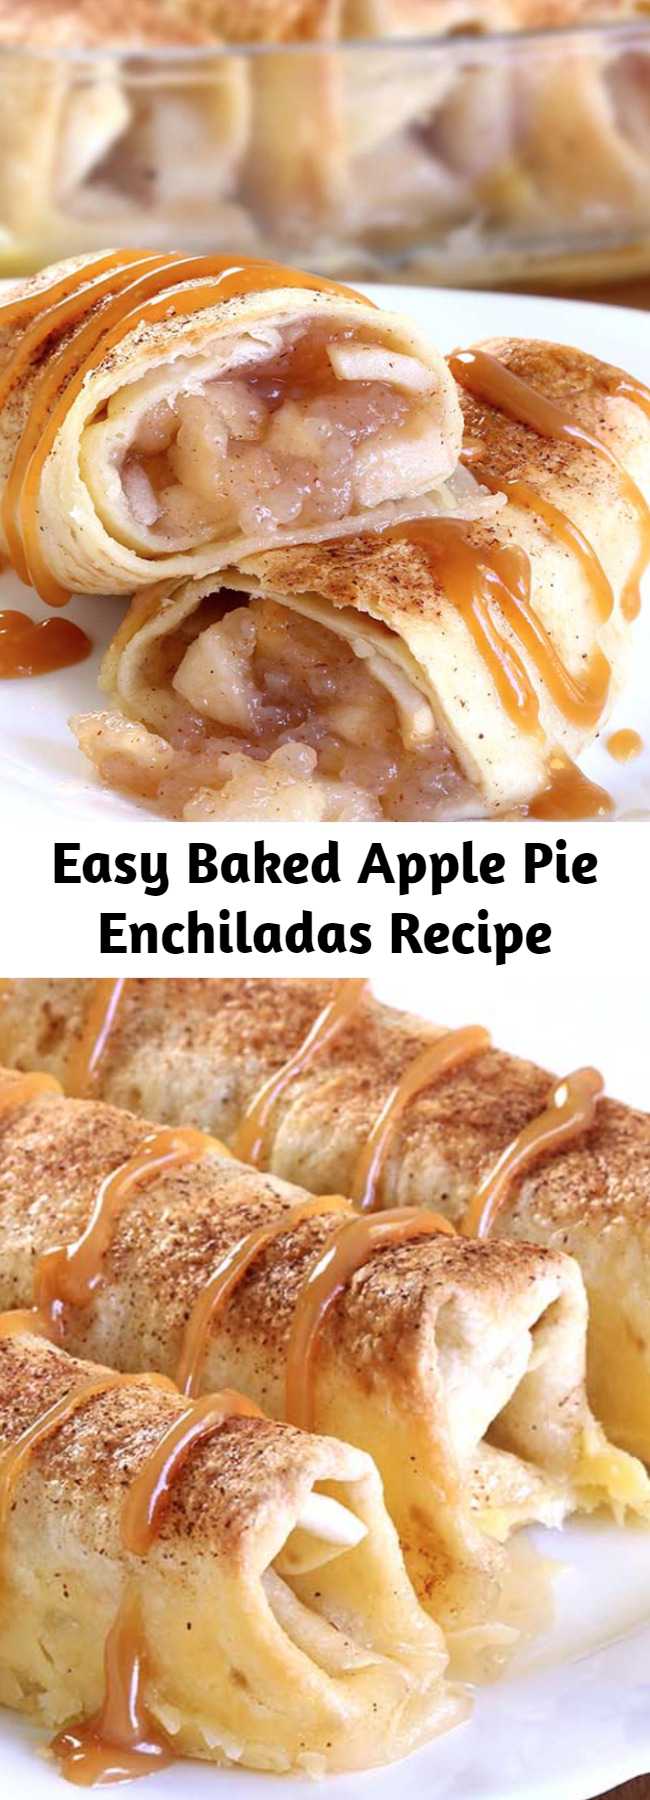 Easy Baked Apple Pie Enchiladas Recipe - This recipe give you all the cinnamony goodness of hot apple pie stuffed securely into a tortilla and drizzled with caramel sauce.